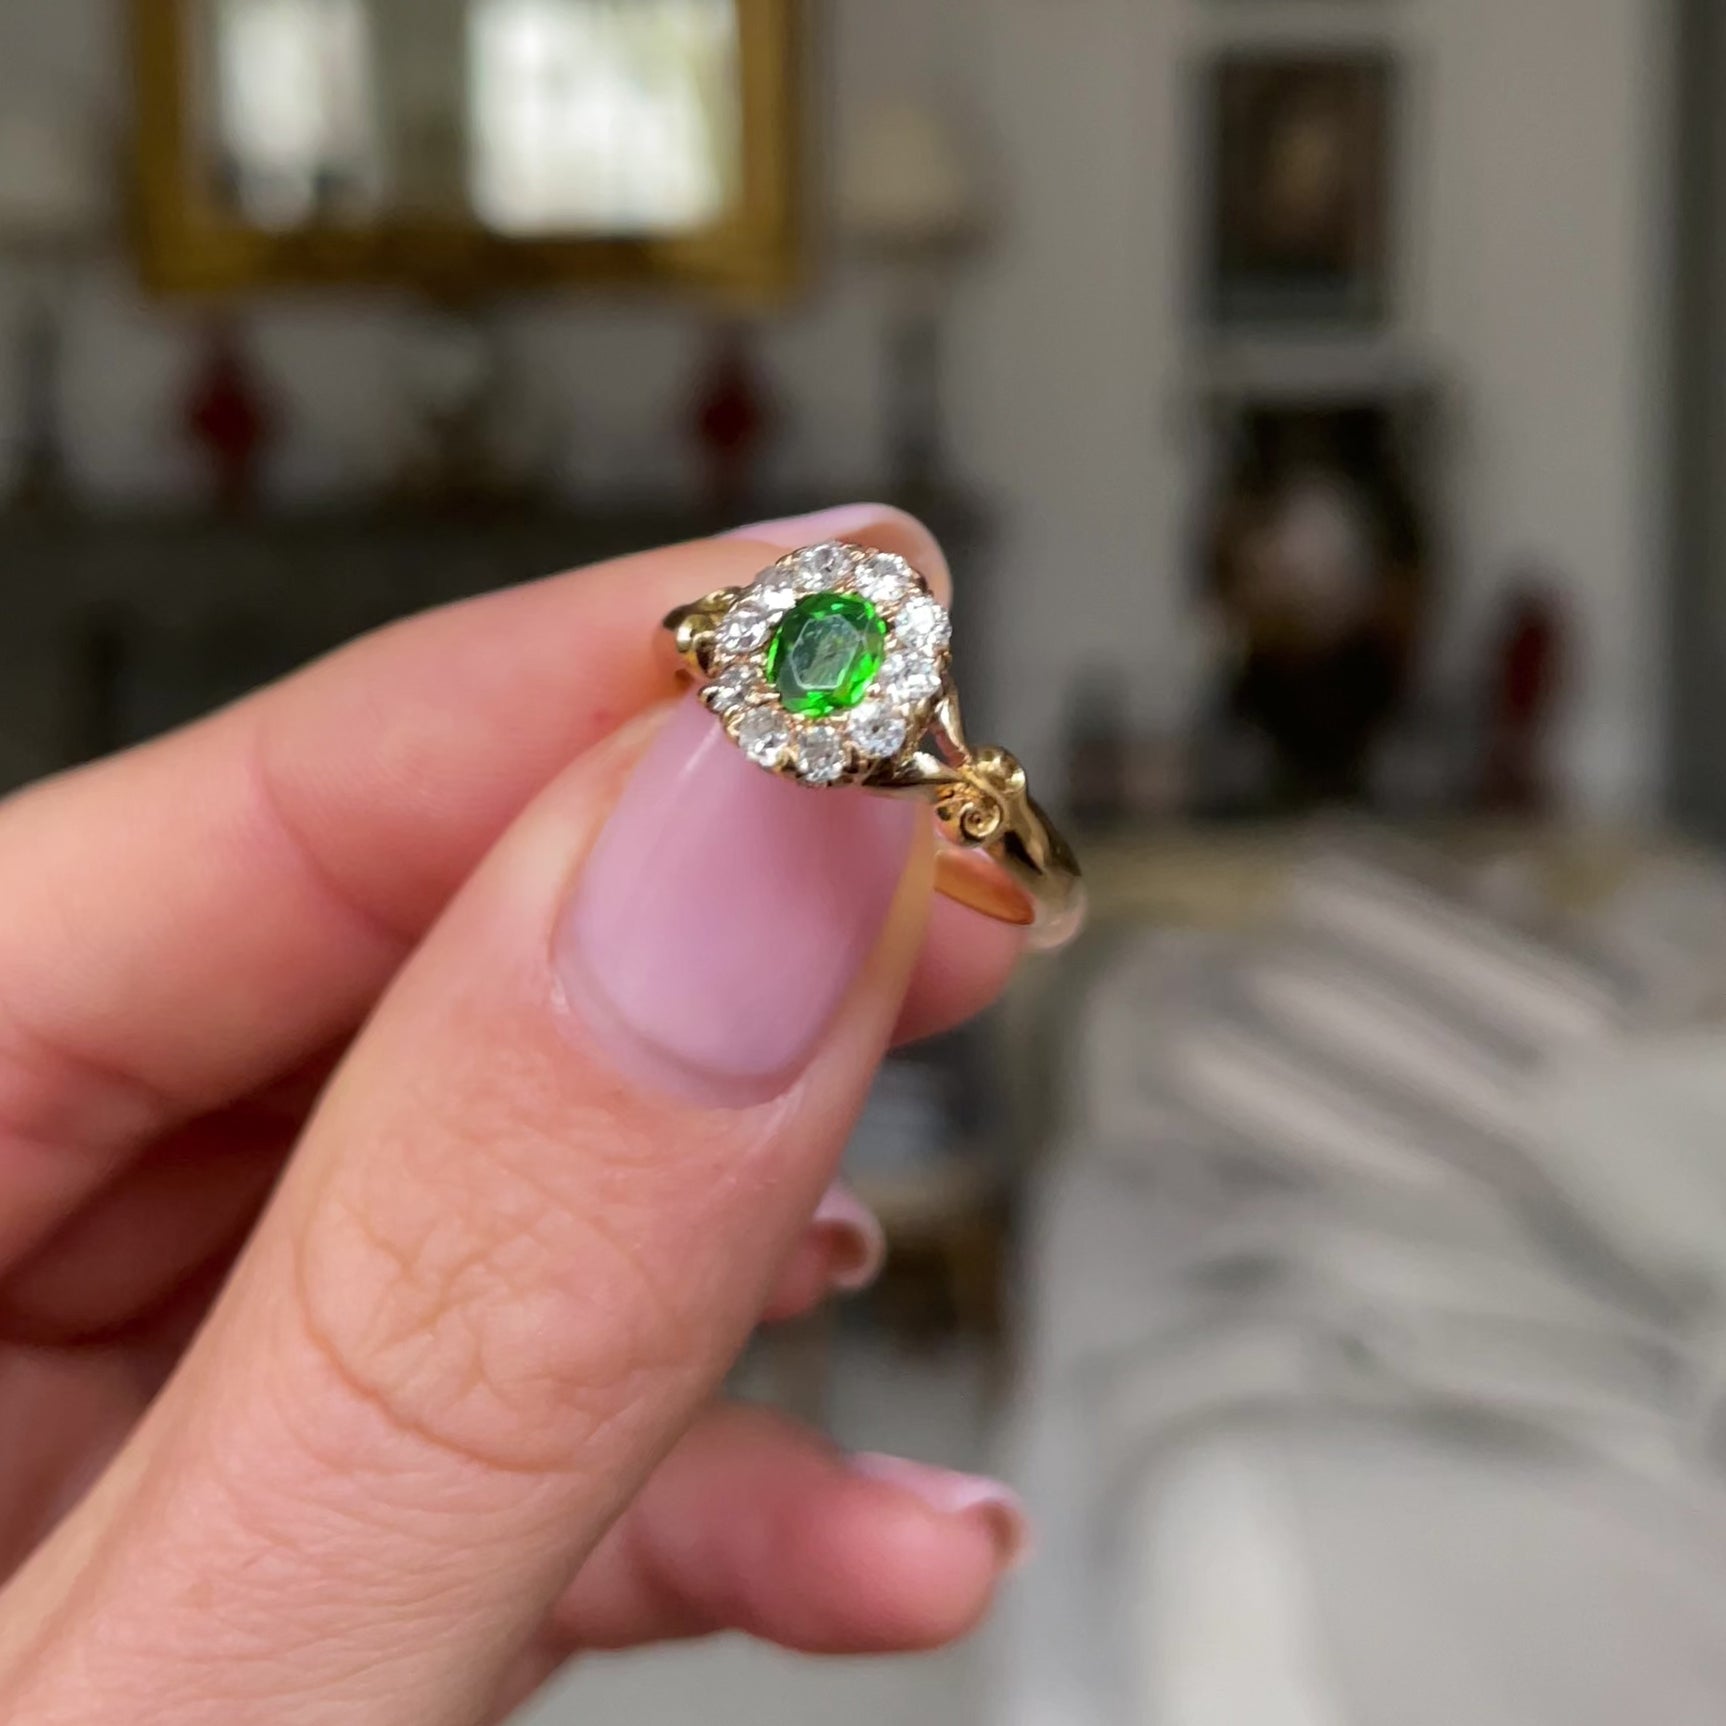 Edwardian, demantoid garnet and diamond cluster ring, held in fingers and rotated to give perspective.